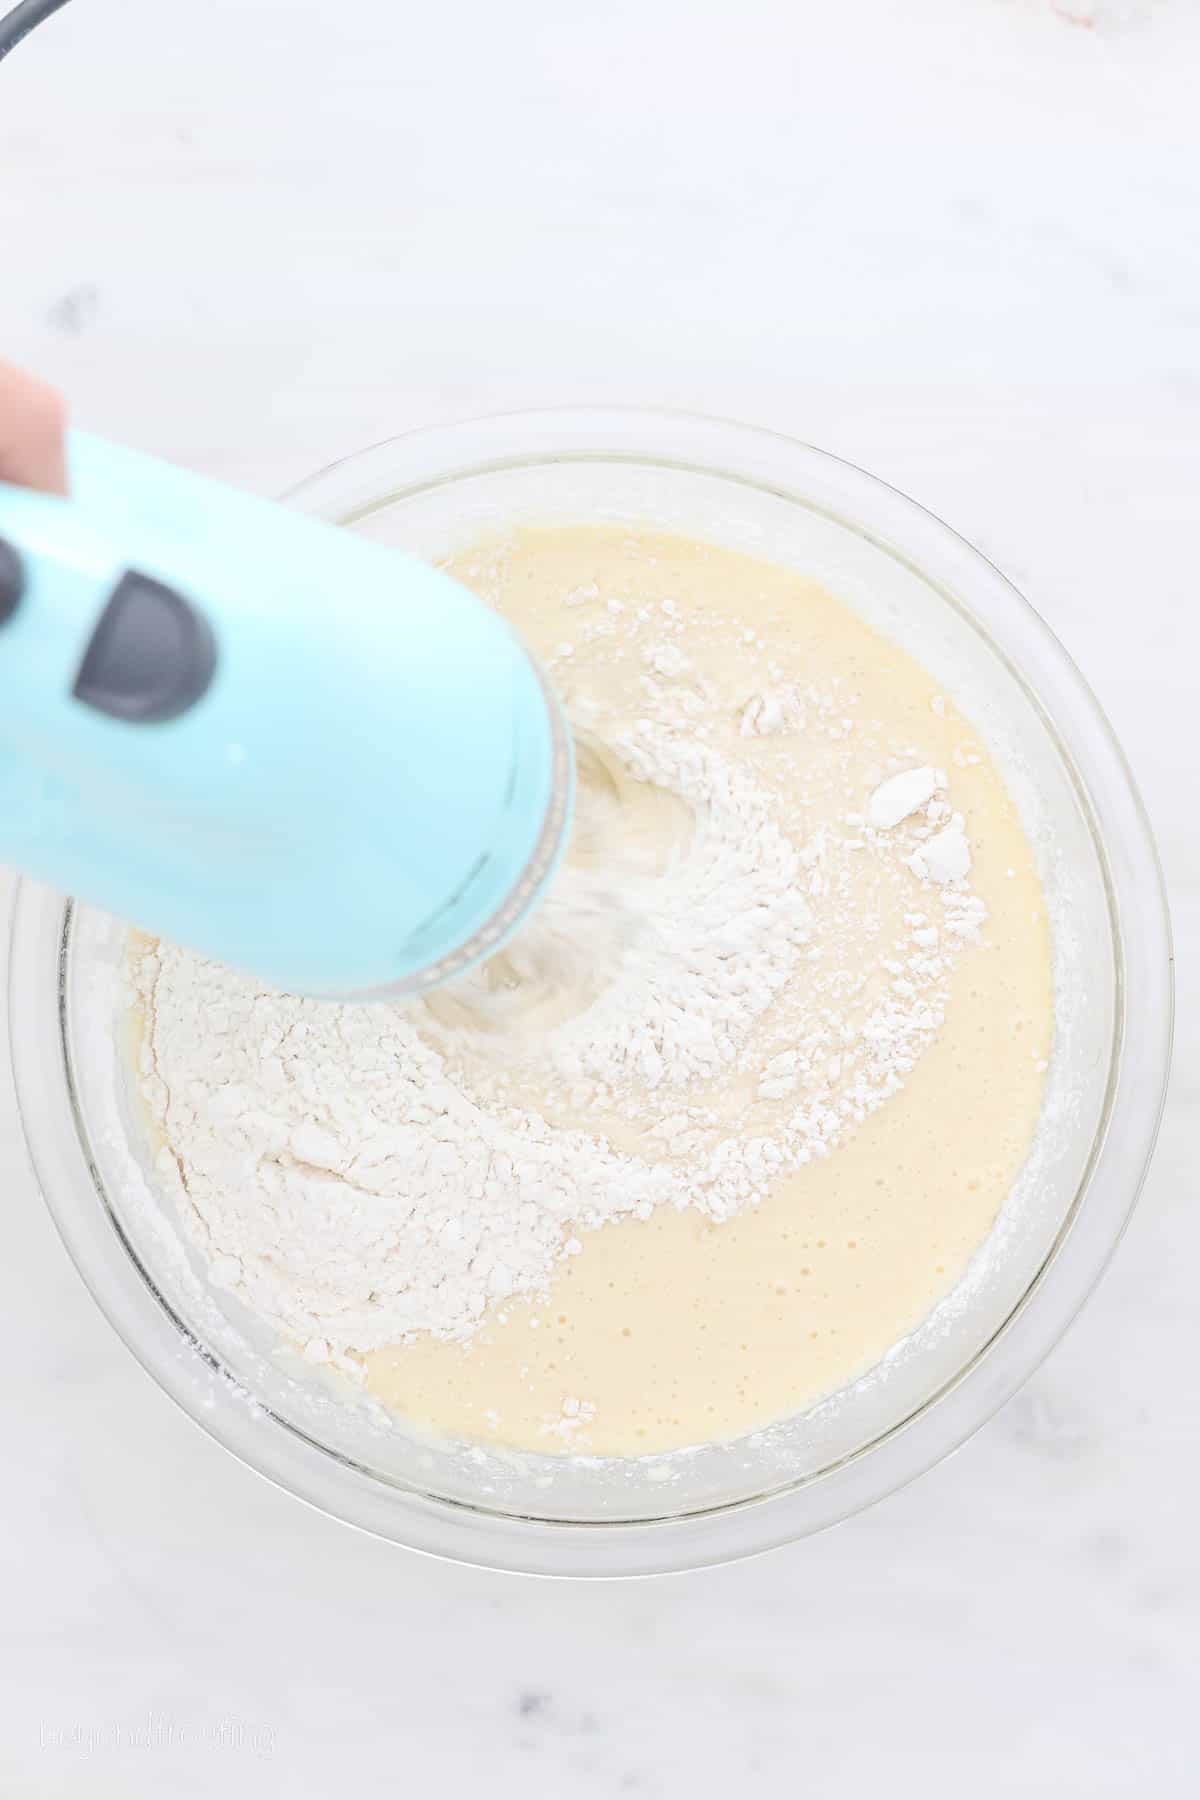 A hand blender is used to combine vanilla cake batter ingredients in a glass mixing bowl.